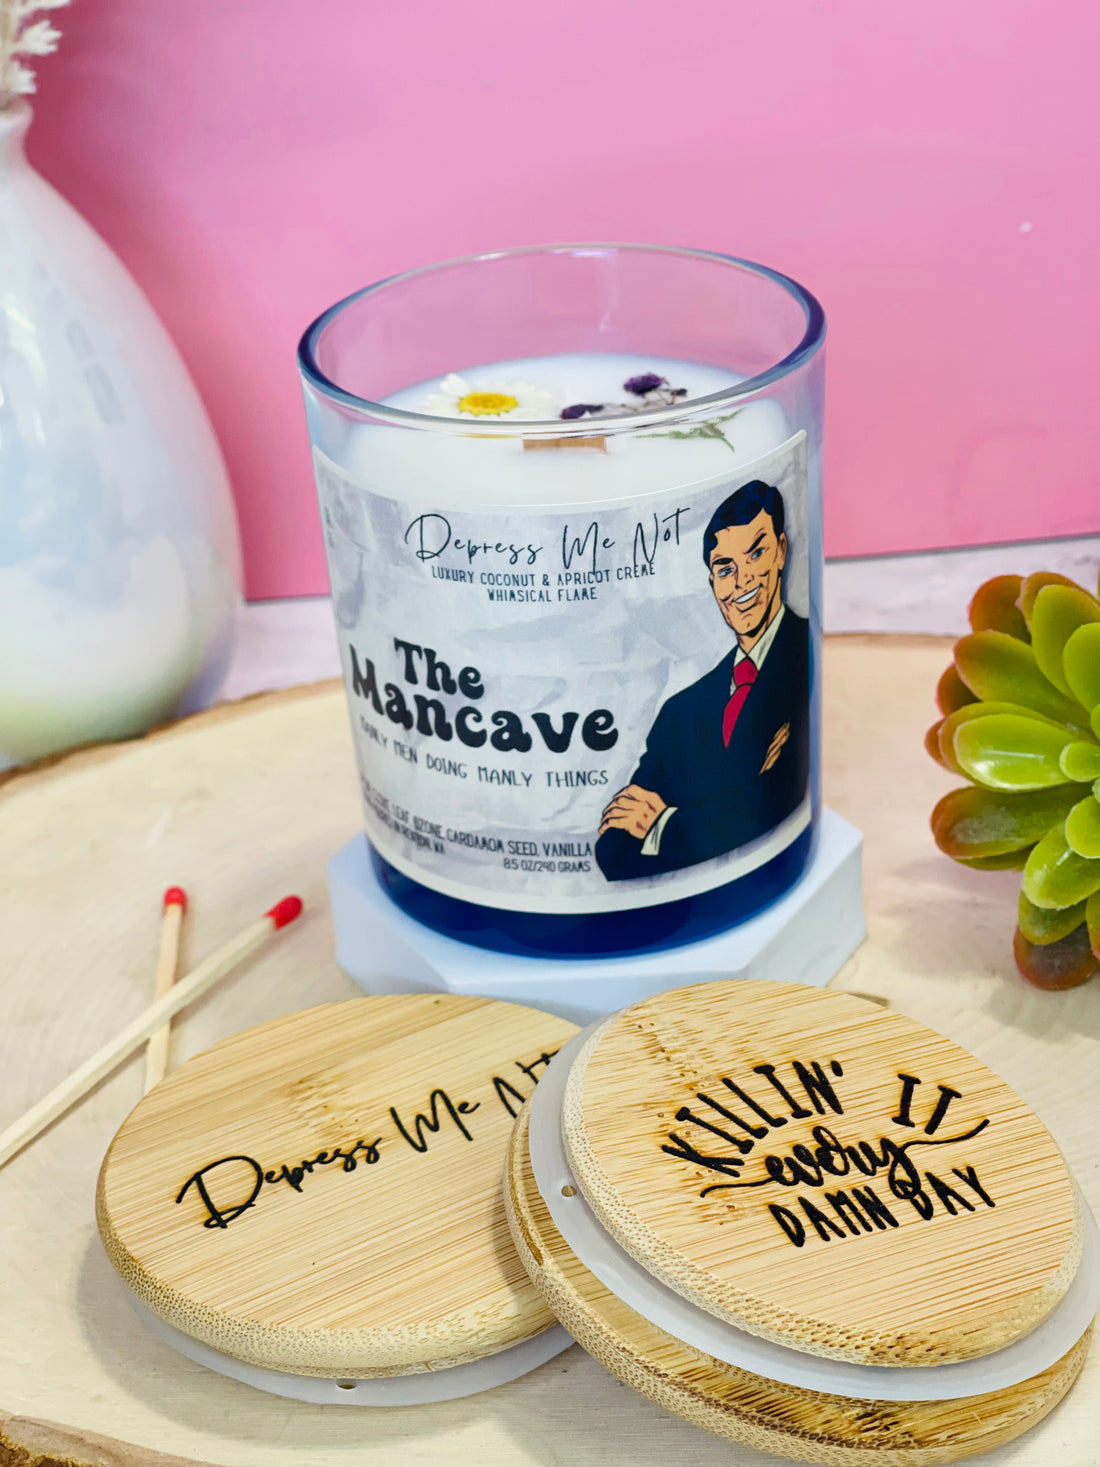 The Man Cave candle